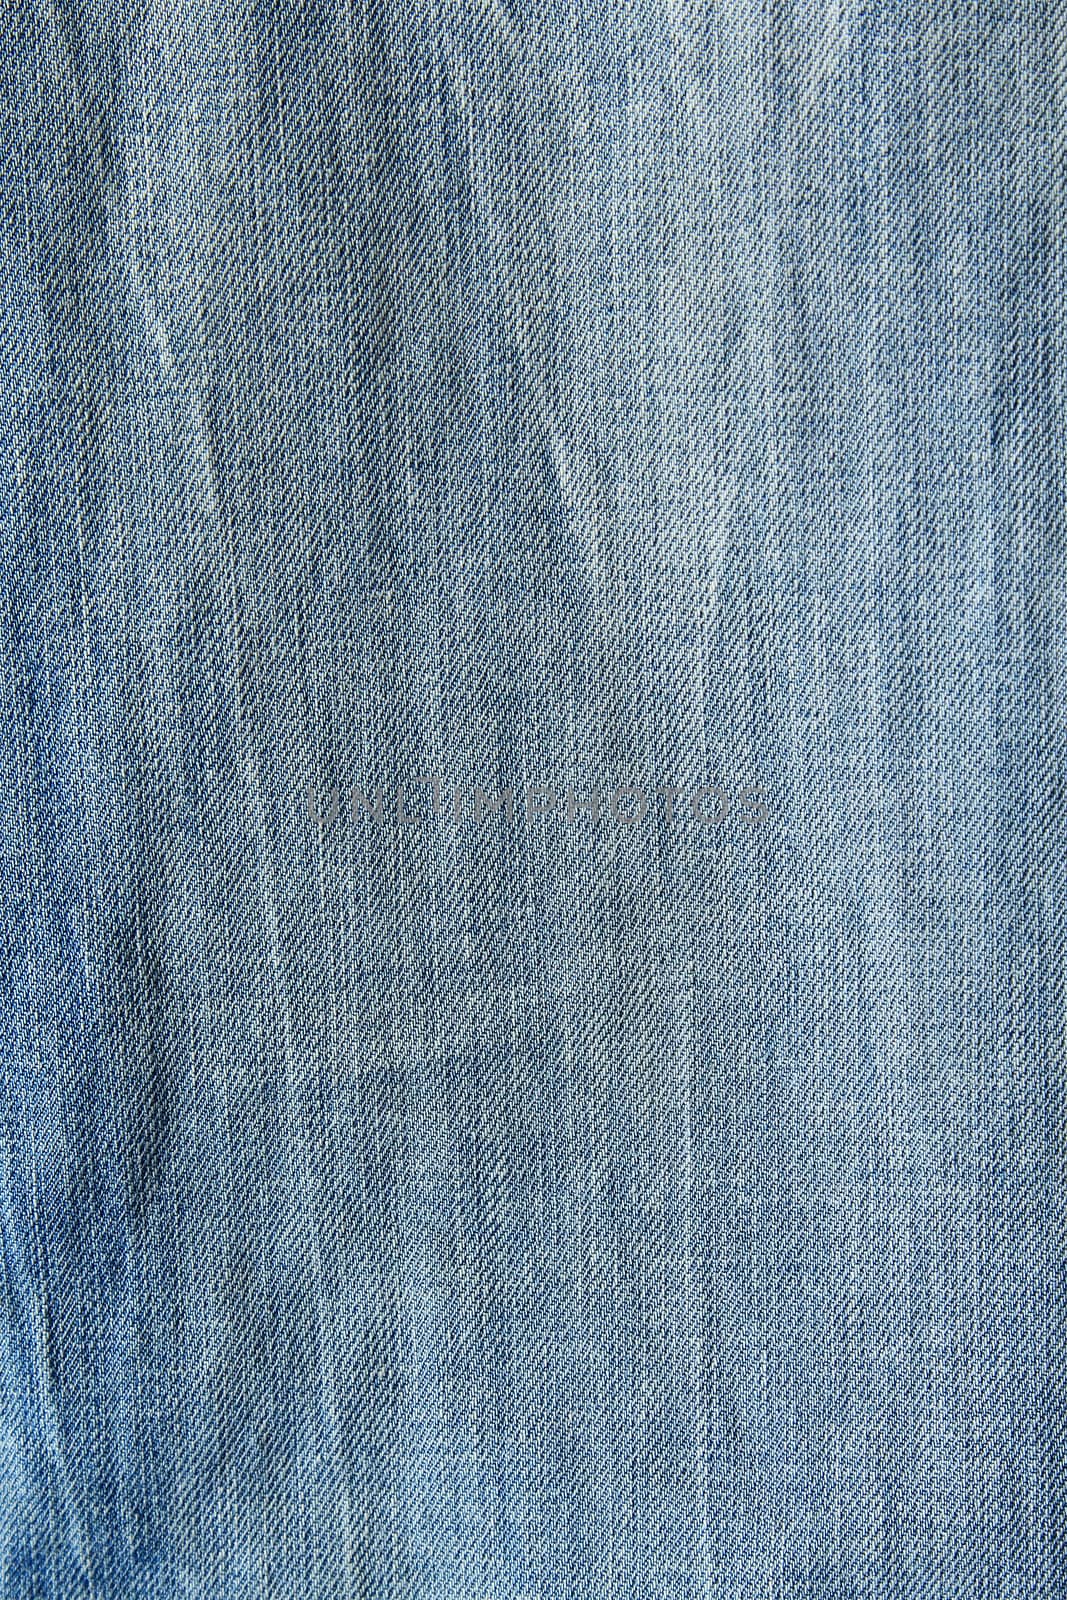 Blue jeans texture background by foto76